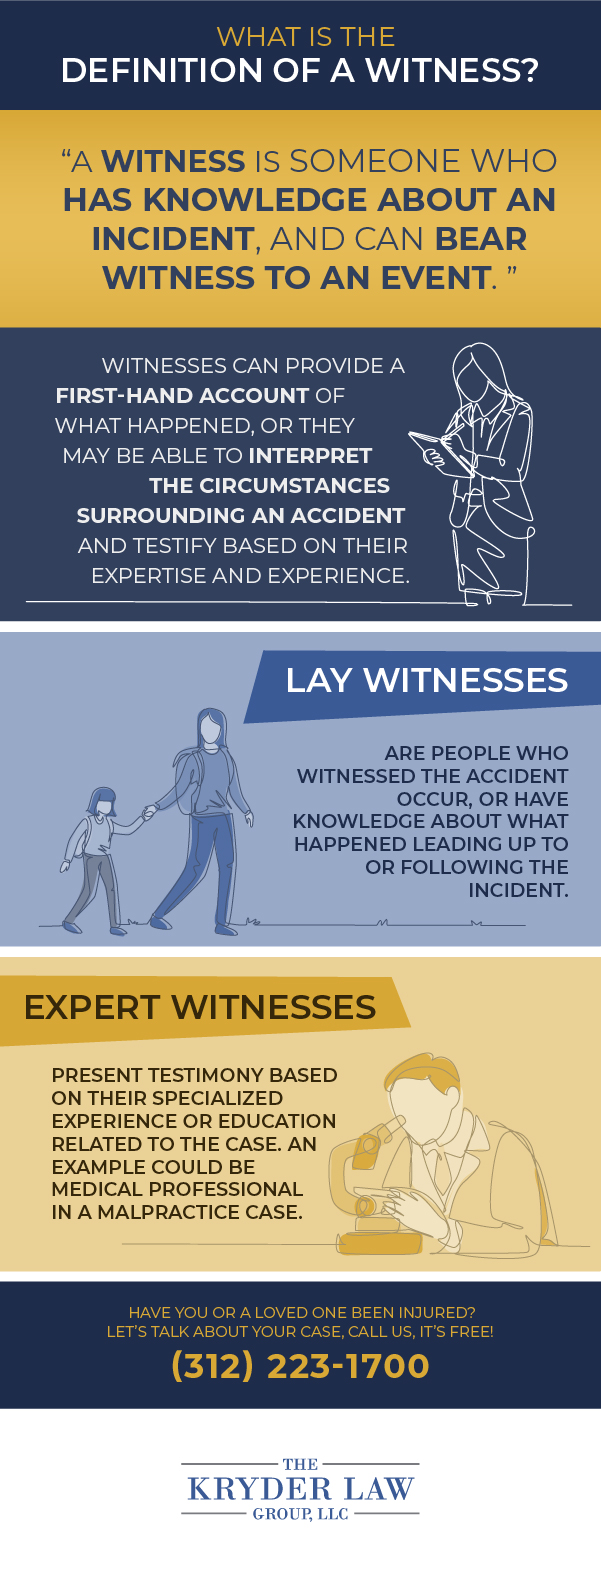 What Is The Definition of a Witness?